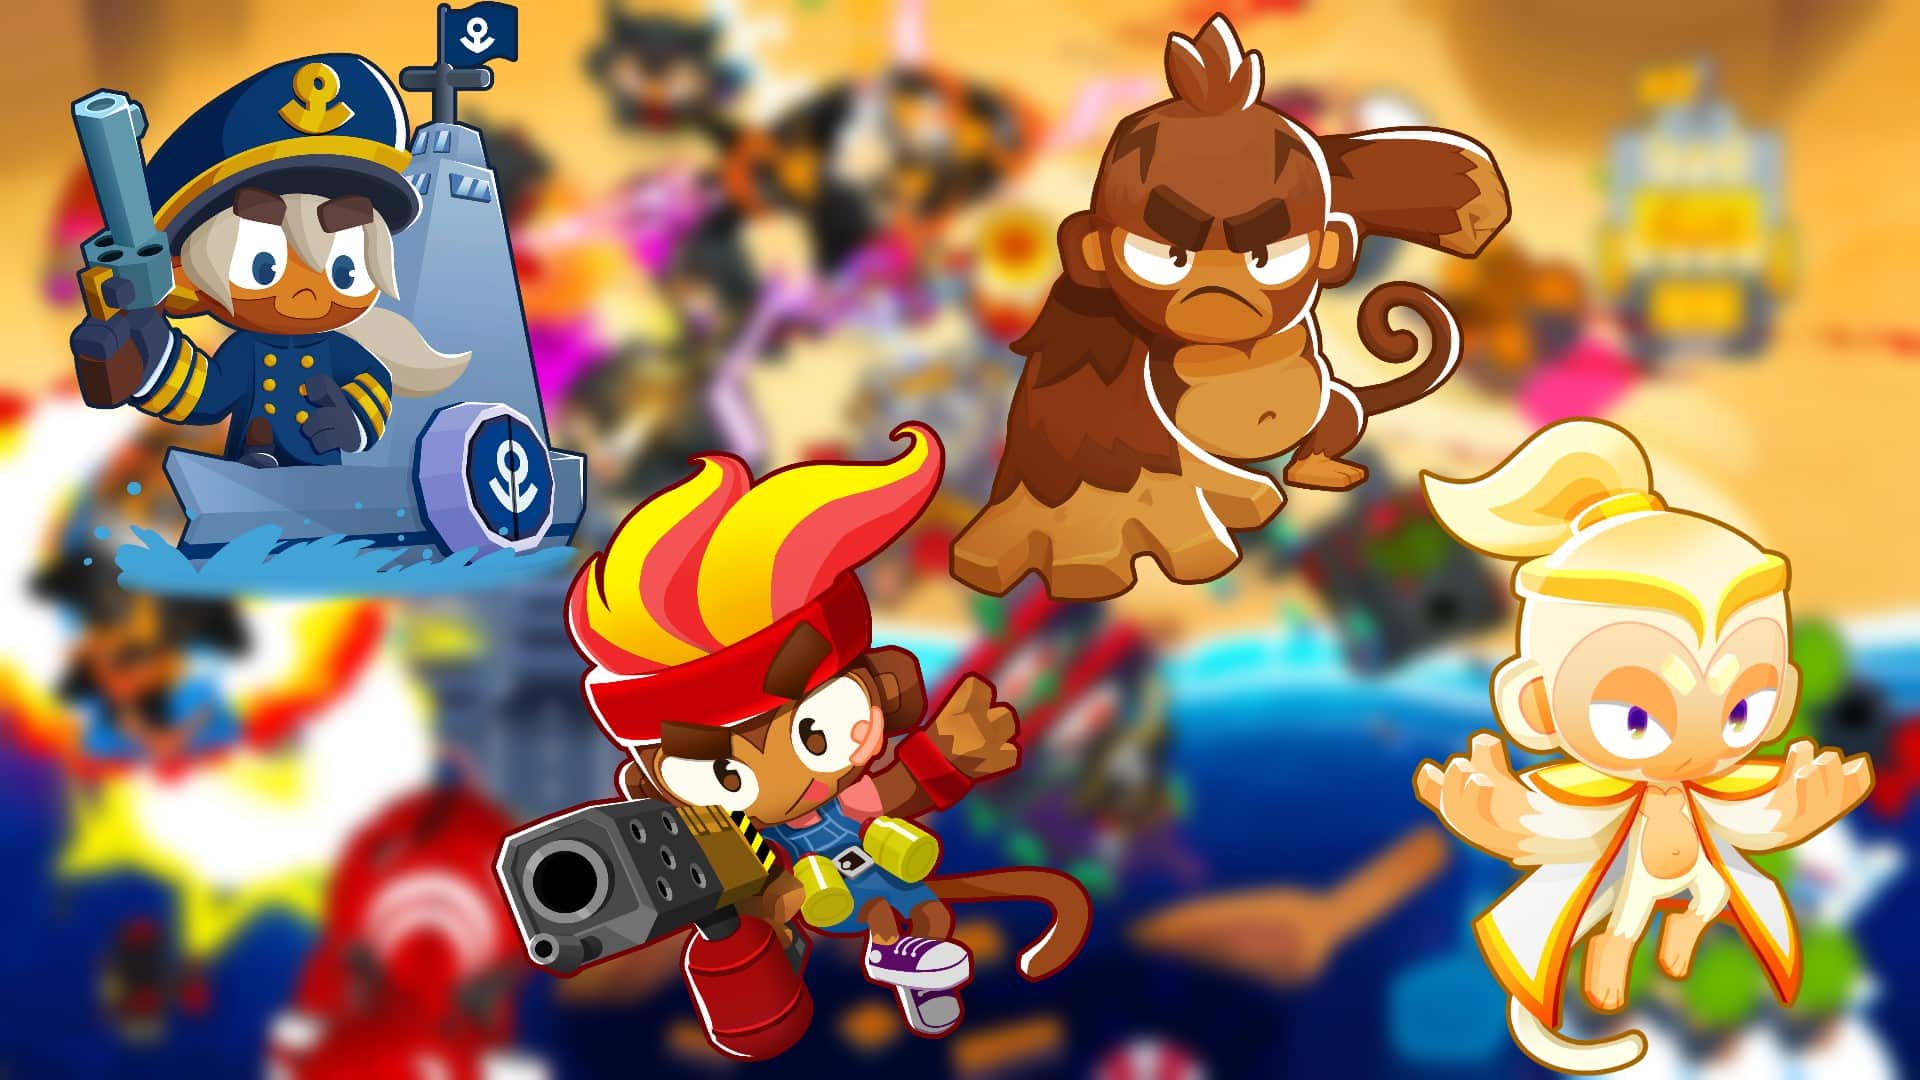 art for bloons td6 featuring multiple in-game heroes